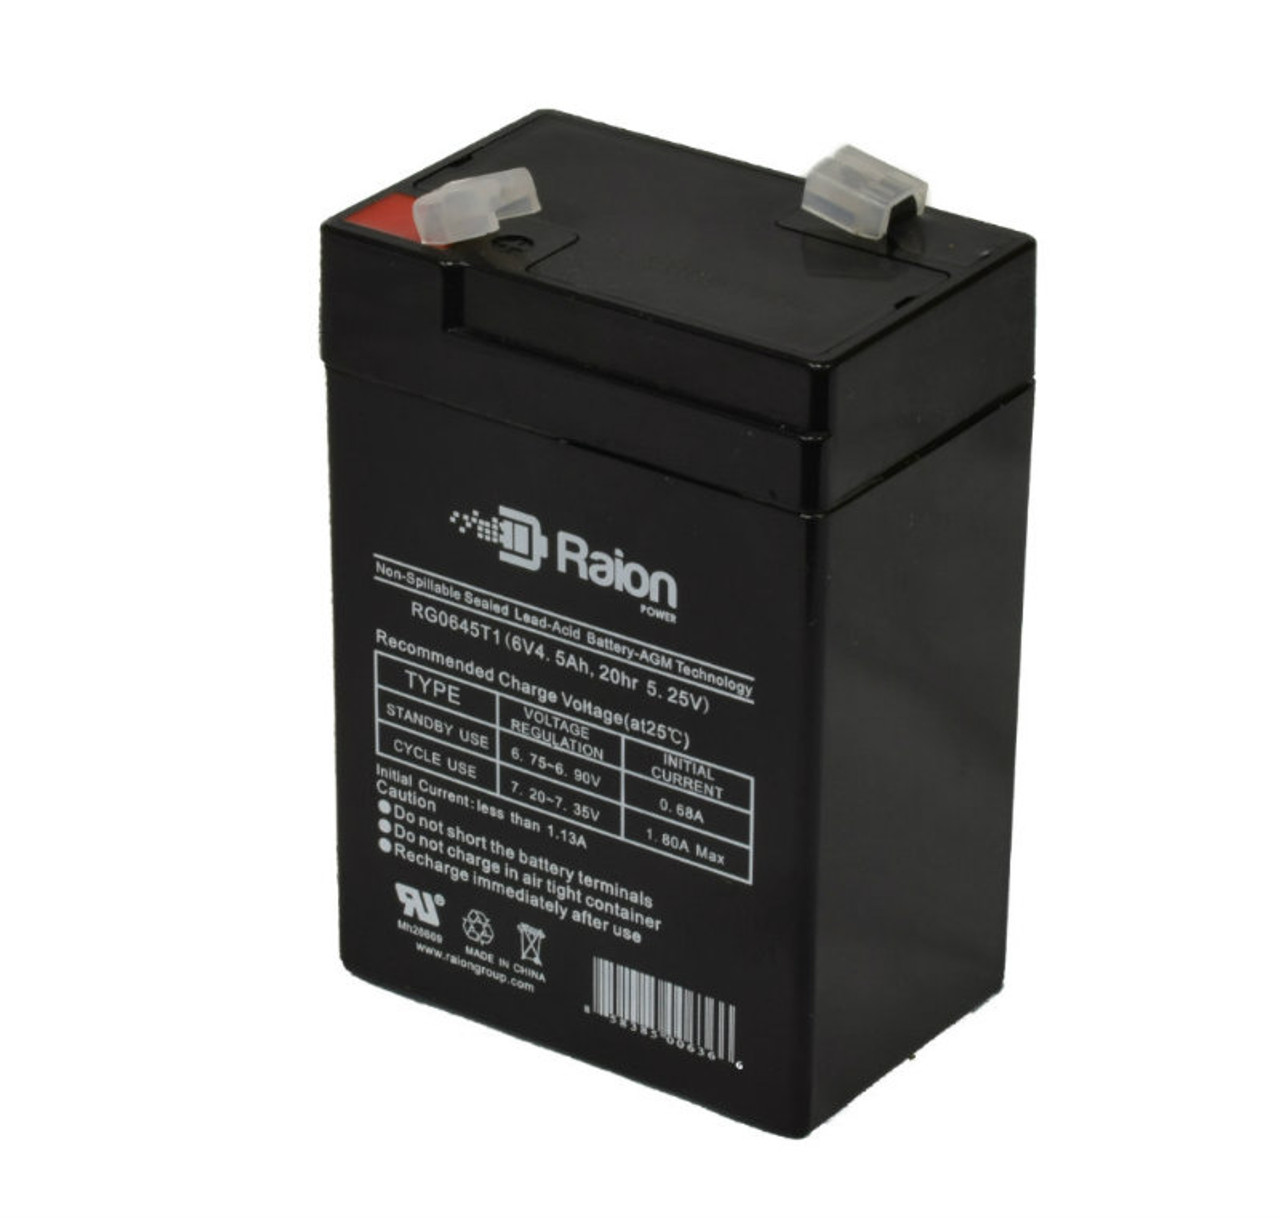 Raion Power RG0645T1 6V 4.5Ah Replacement Battery Cartridge for Baxter Healthcare 521 Microate Inf Pump